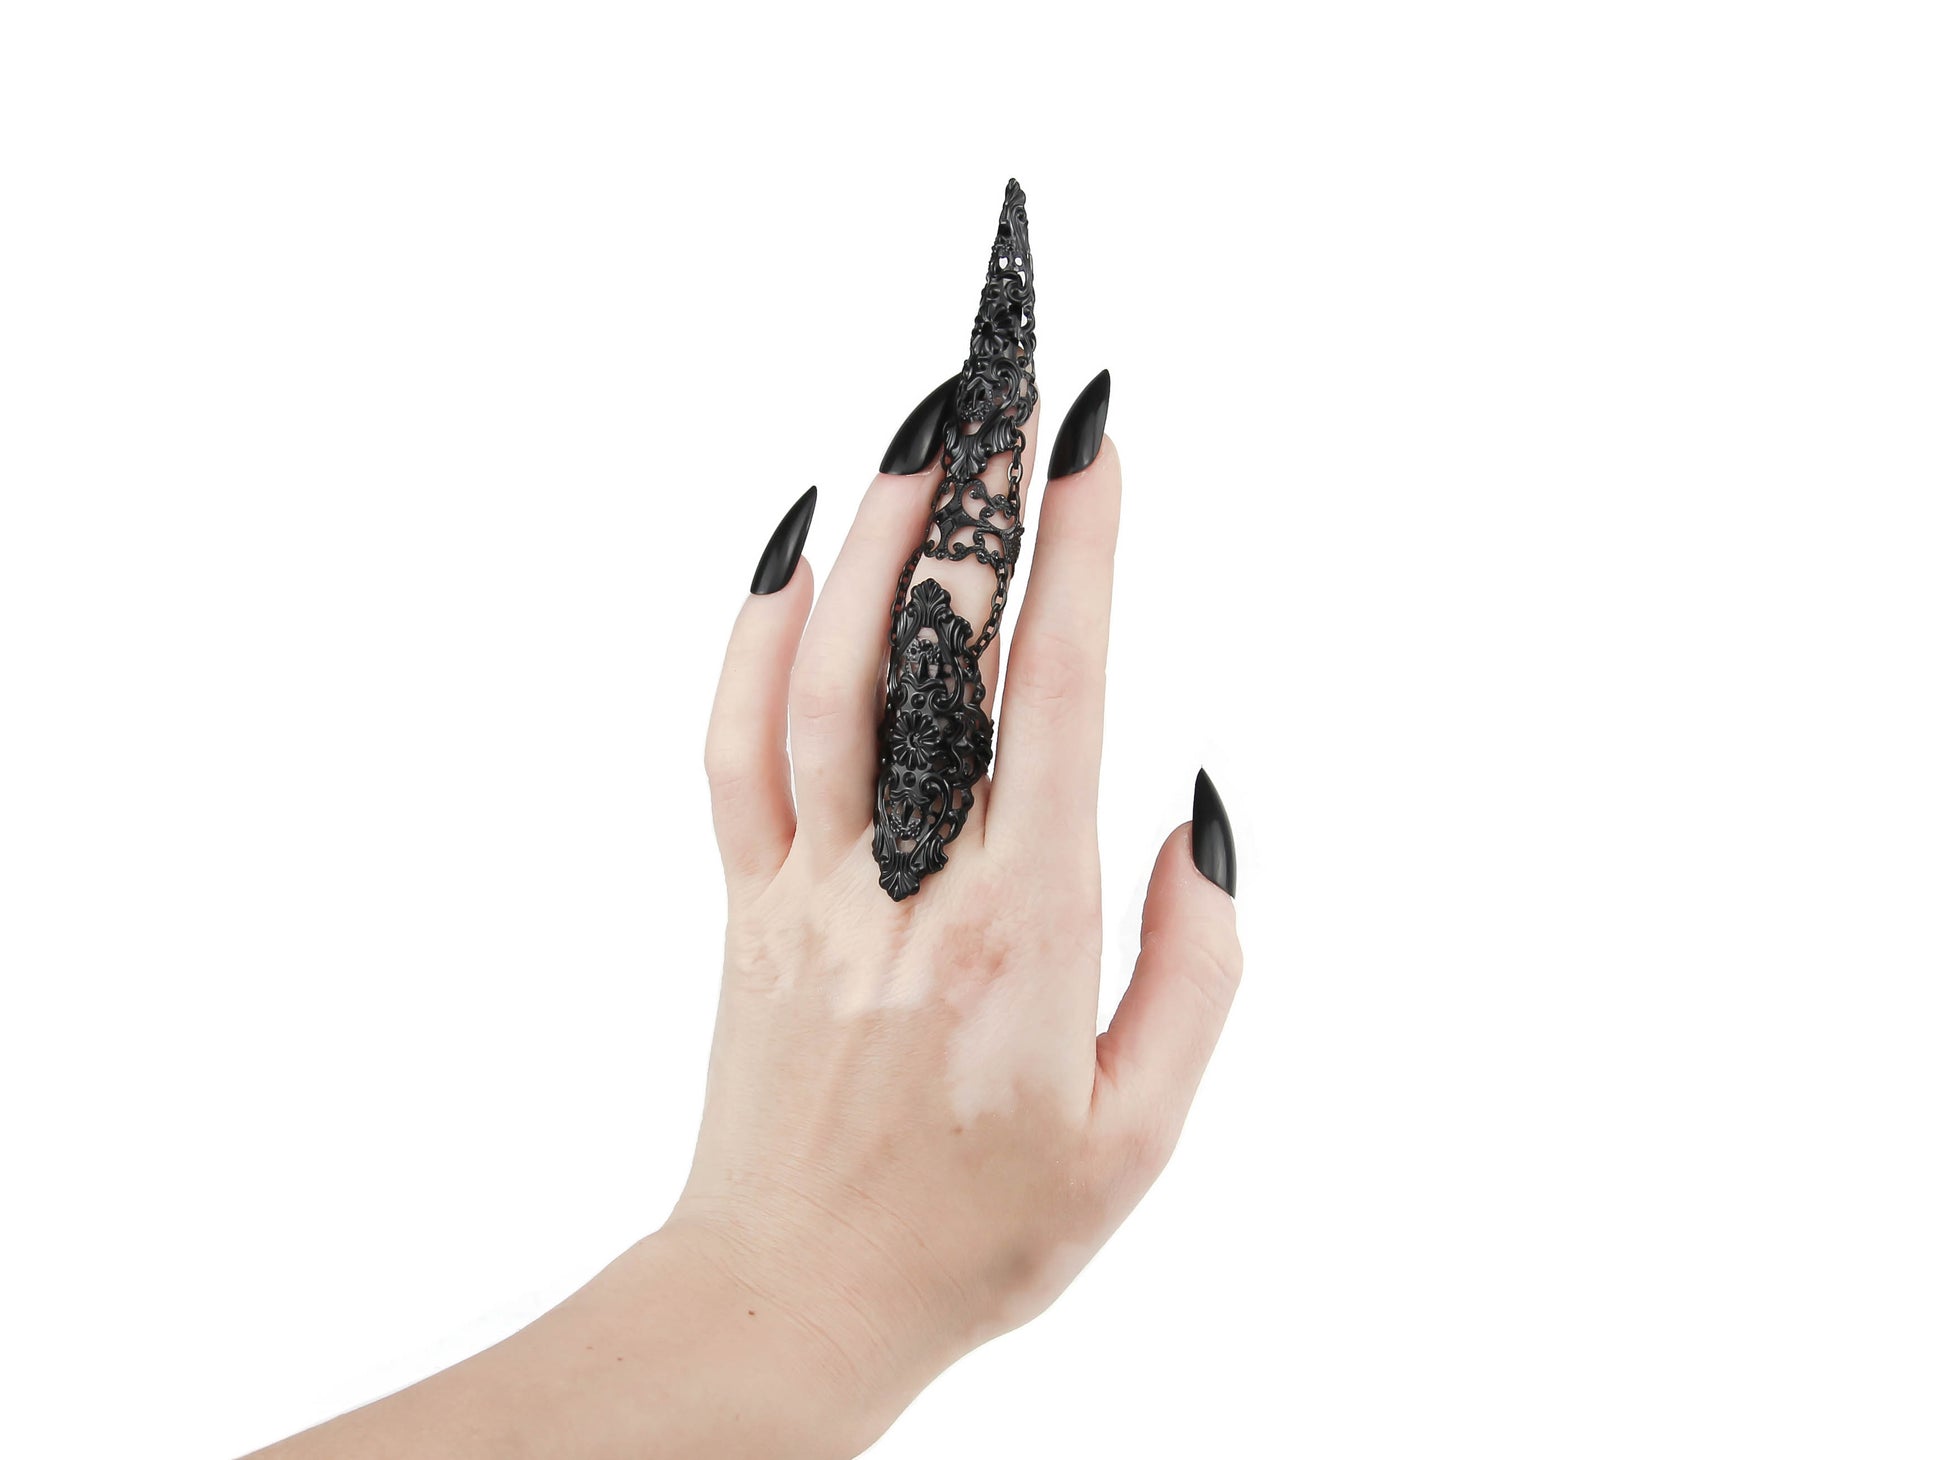 A hand elegantly displays a Myril Jewels black full finger claw ring, an embodiment of neo-gothic craftsmanship. This dark-avantgarde piece, perfect for lovers of gothic and alternative styles, features intricate filigree that gives an air of Halloween mystique. The black claw ring is a striking choice for punk jewelry aficionados and adds a touch of gothic-chic to everyday wear, as well as festival and rave party ensembles